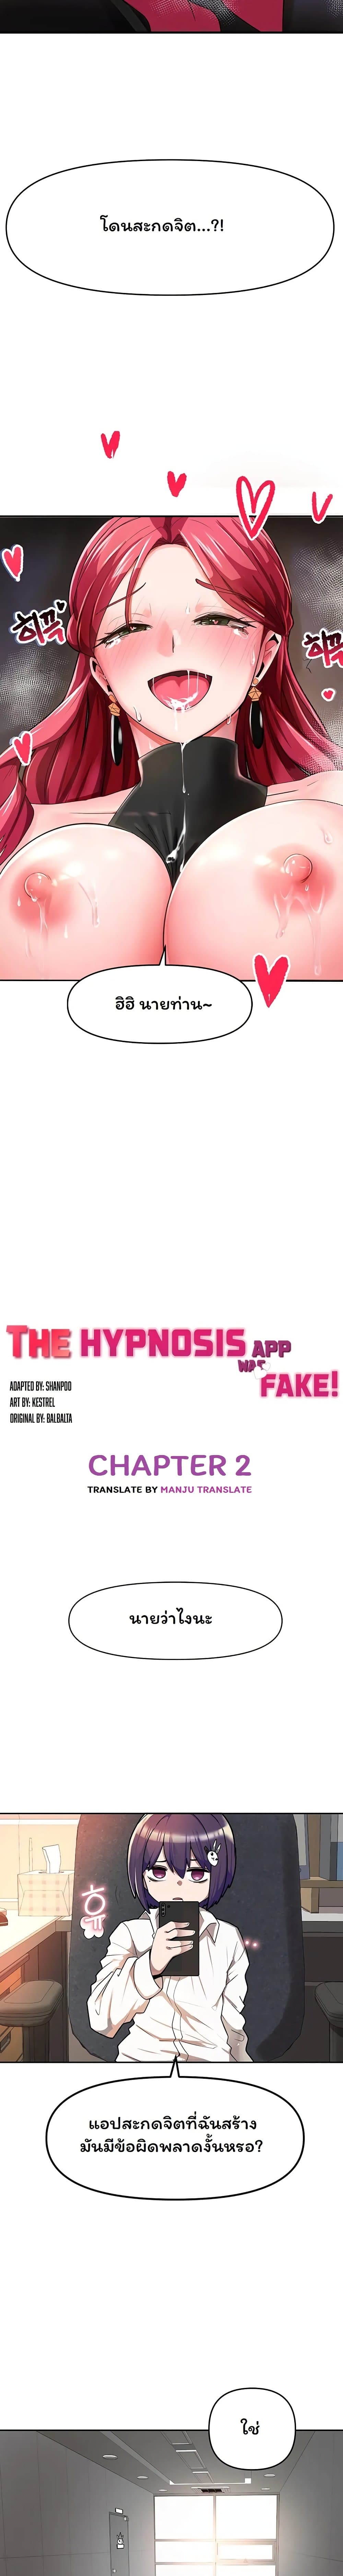 The Hypnosis App Was Fake 2-2